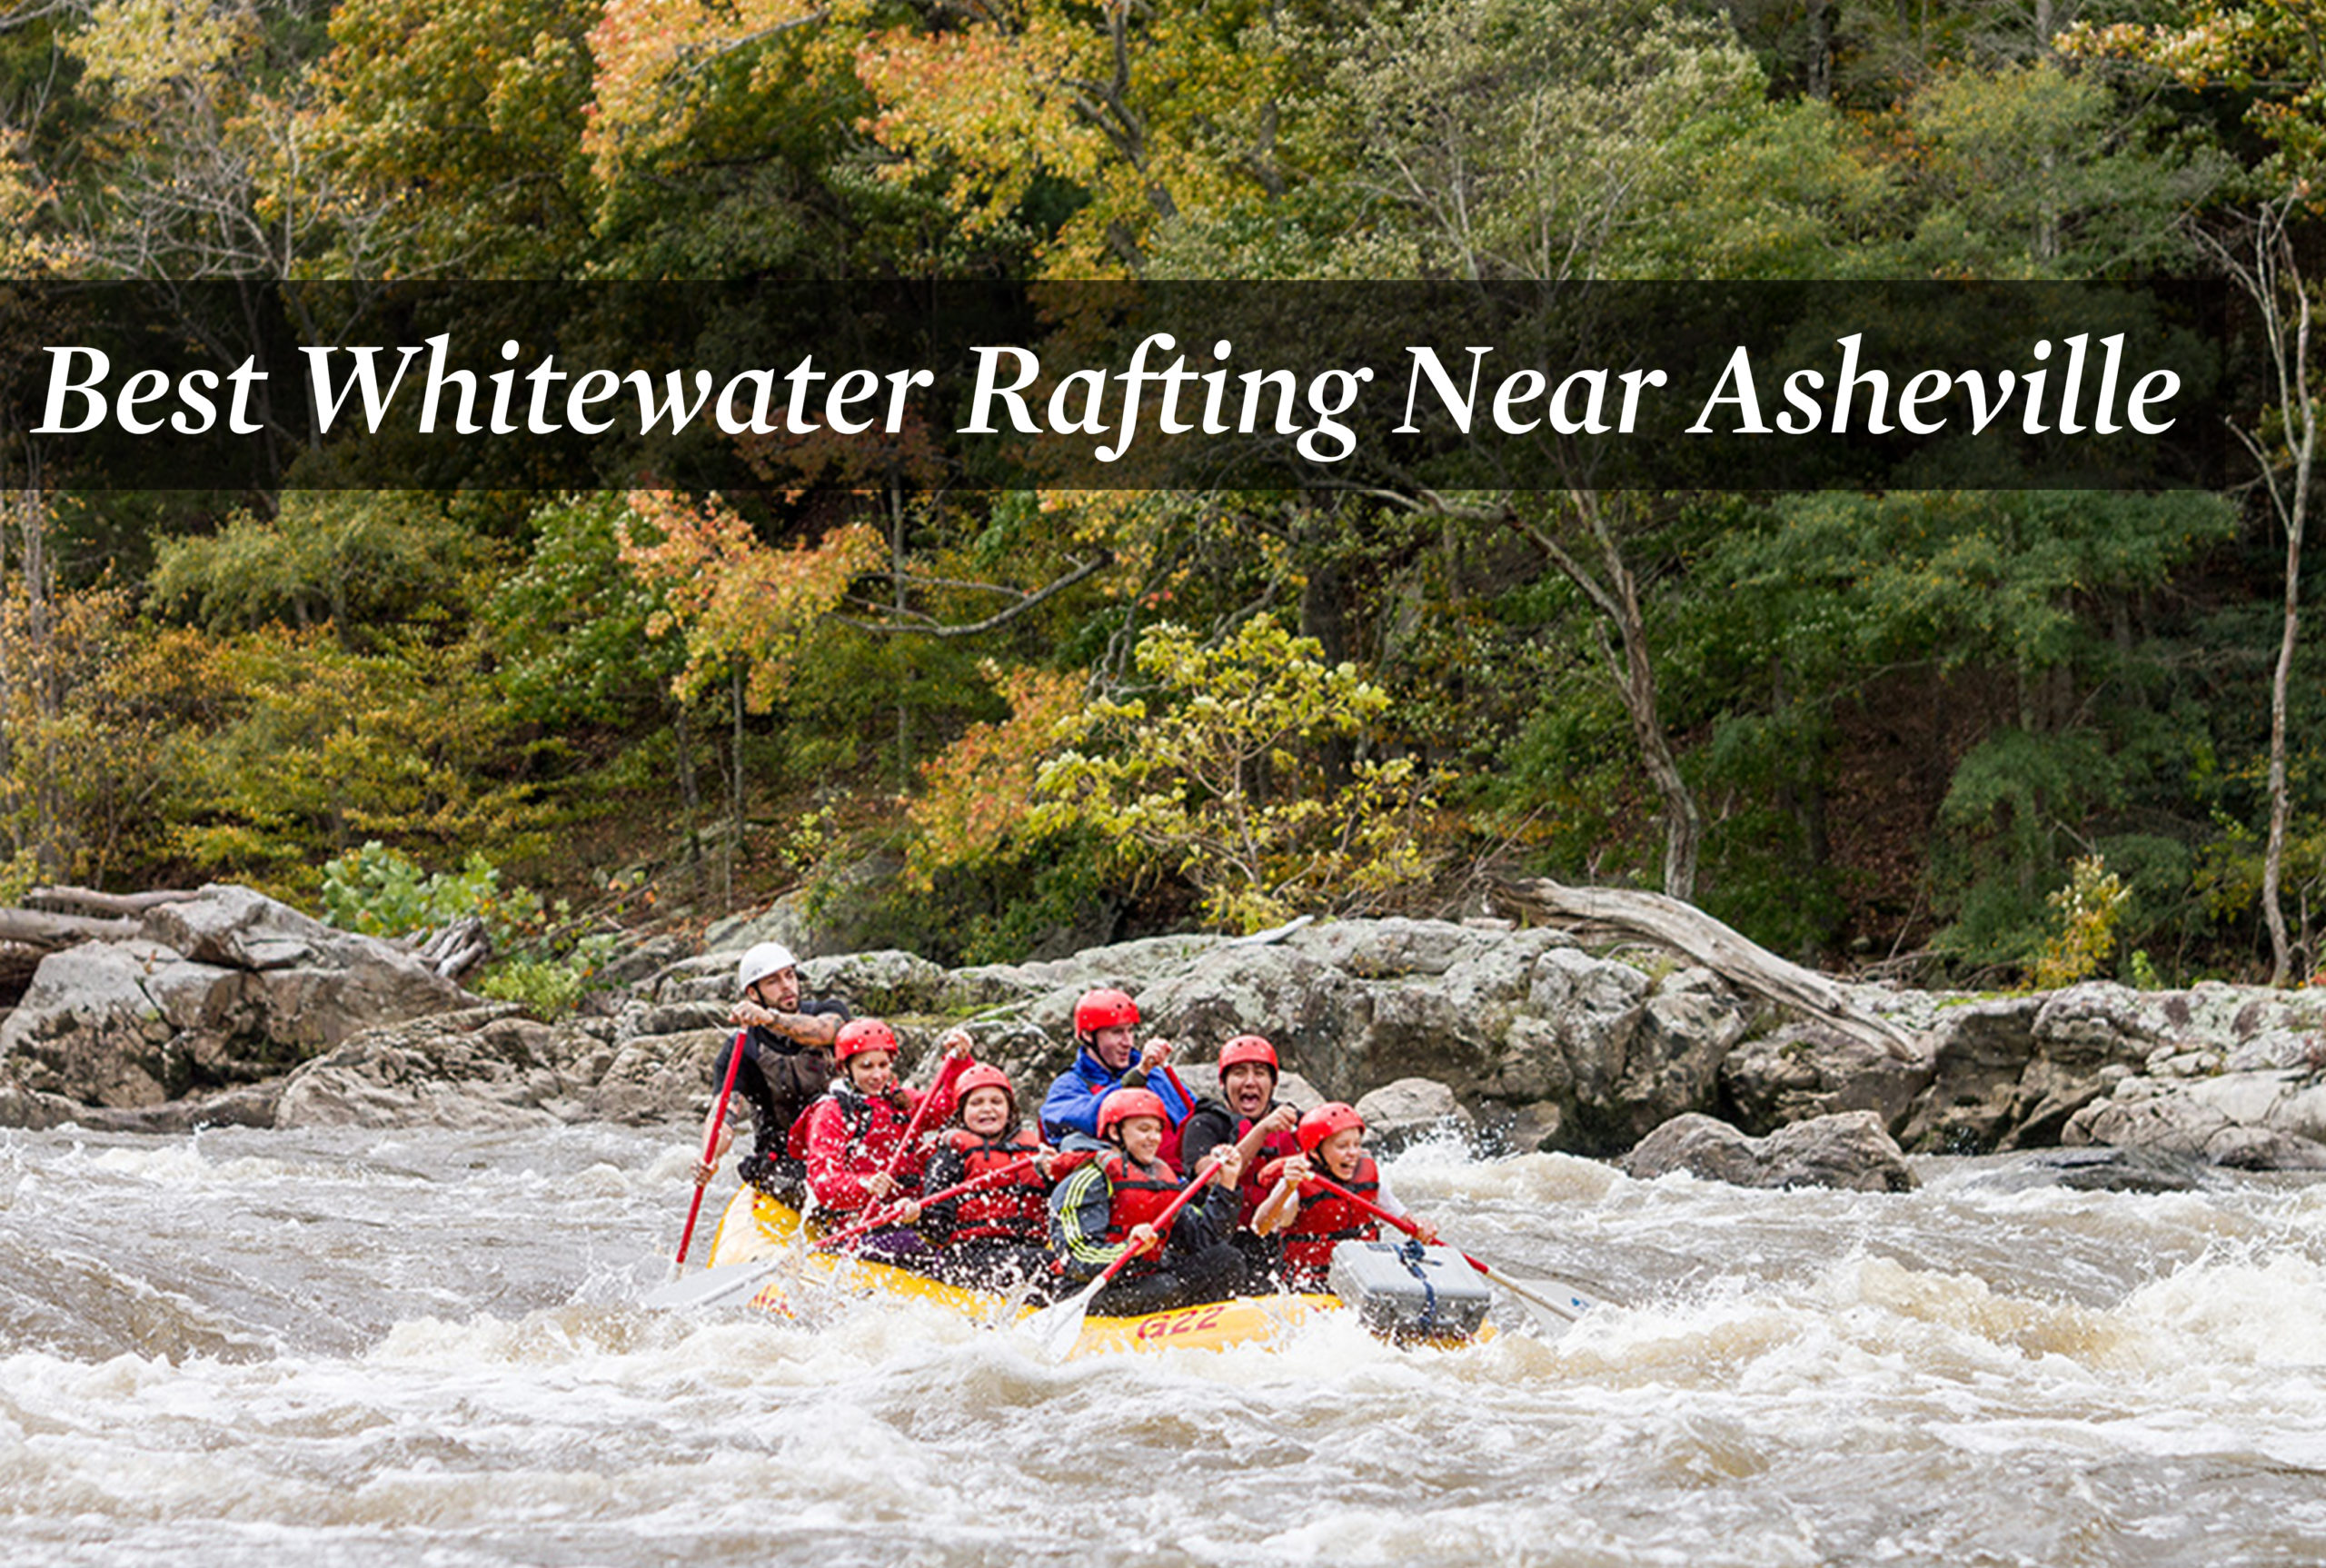 Best Whitewater Rafting Near Asheville, NC